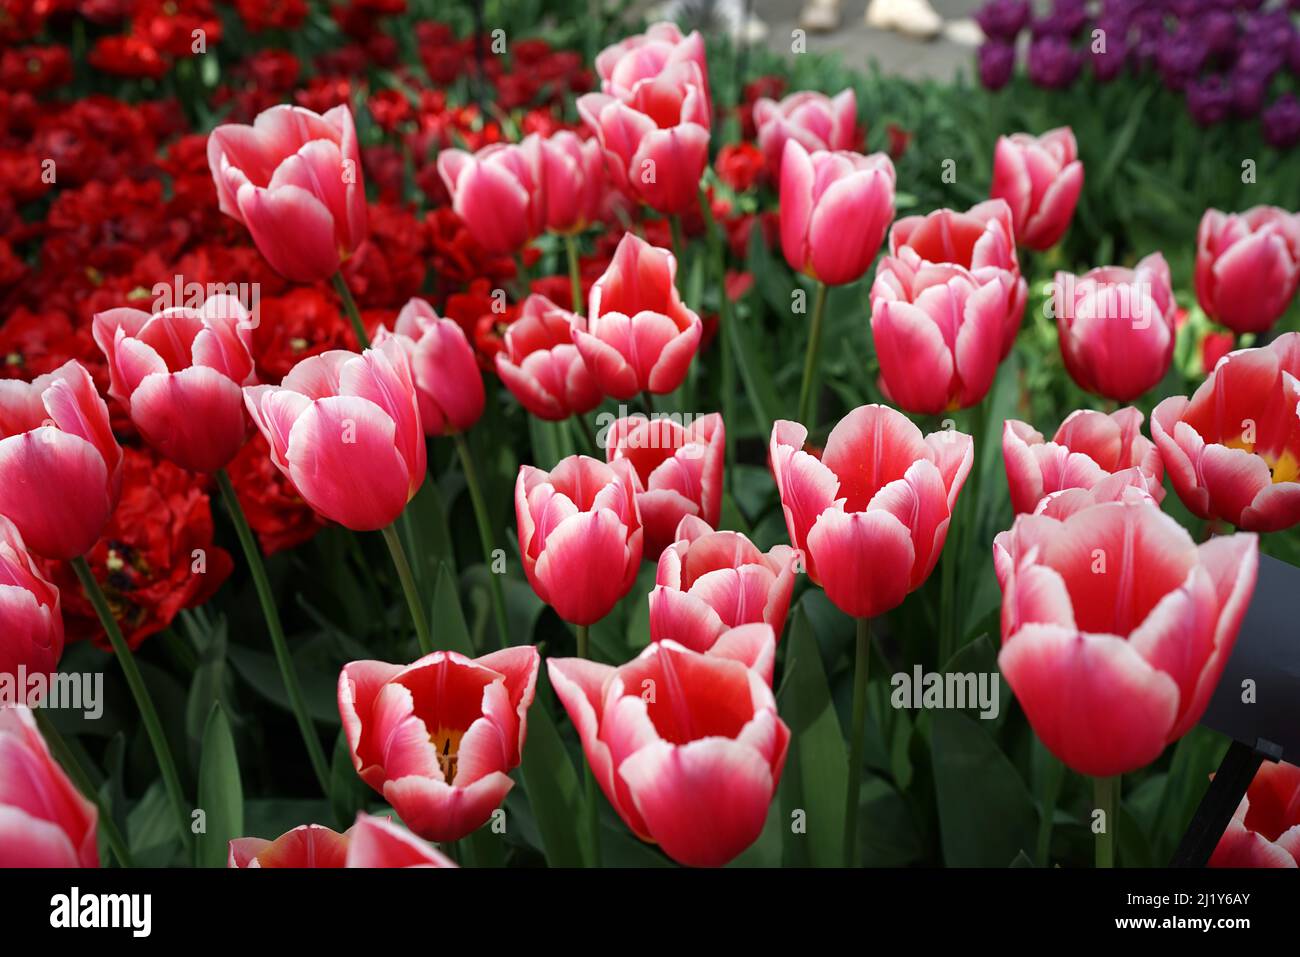 Red and white tulip cultivar 'Eurotopper'. This tulips stand between deep red and purple ones Stock Photo